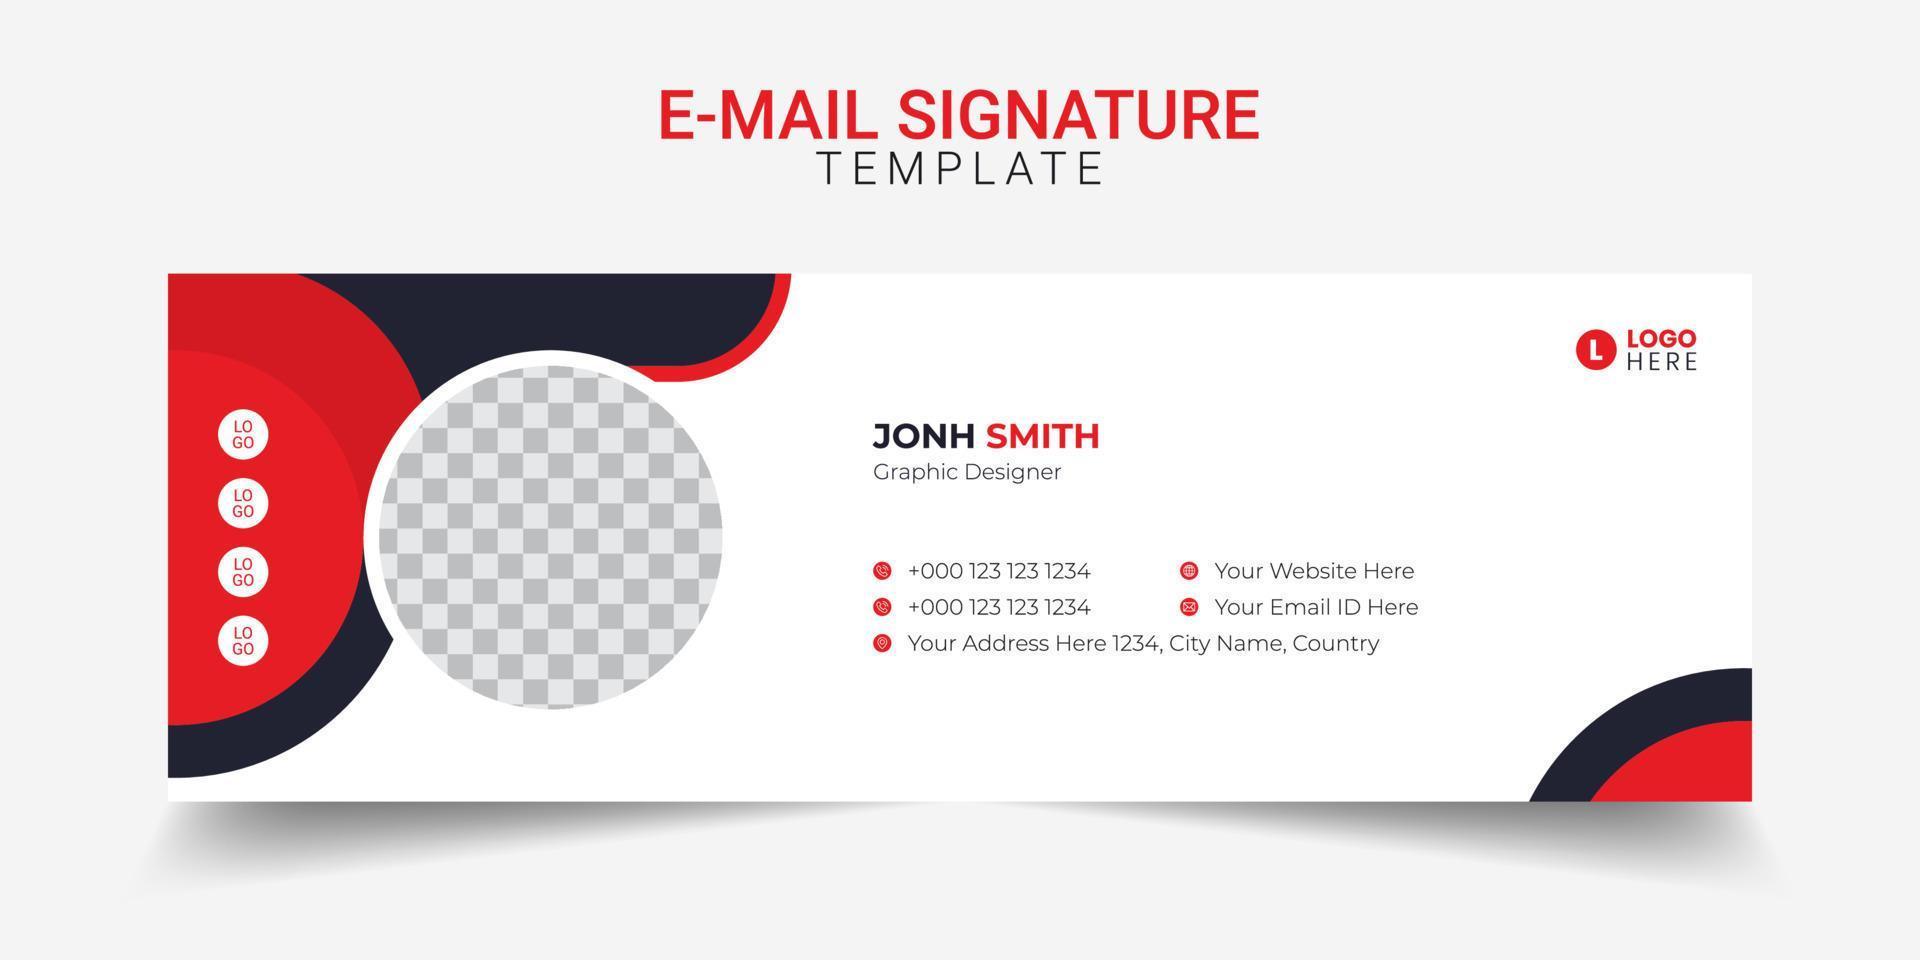 Creative email signature business modern footer template design. vector